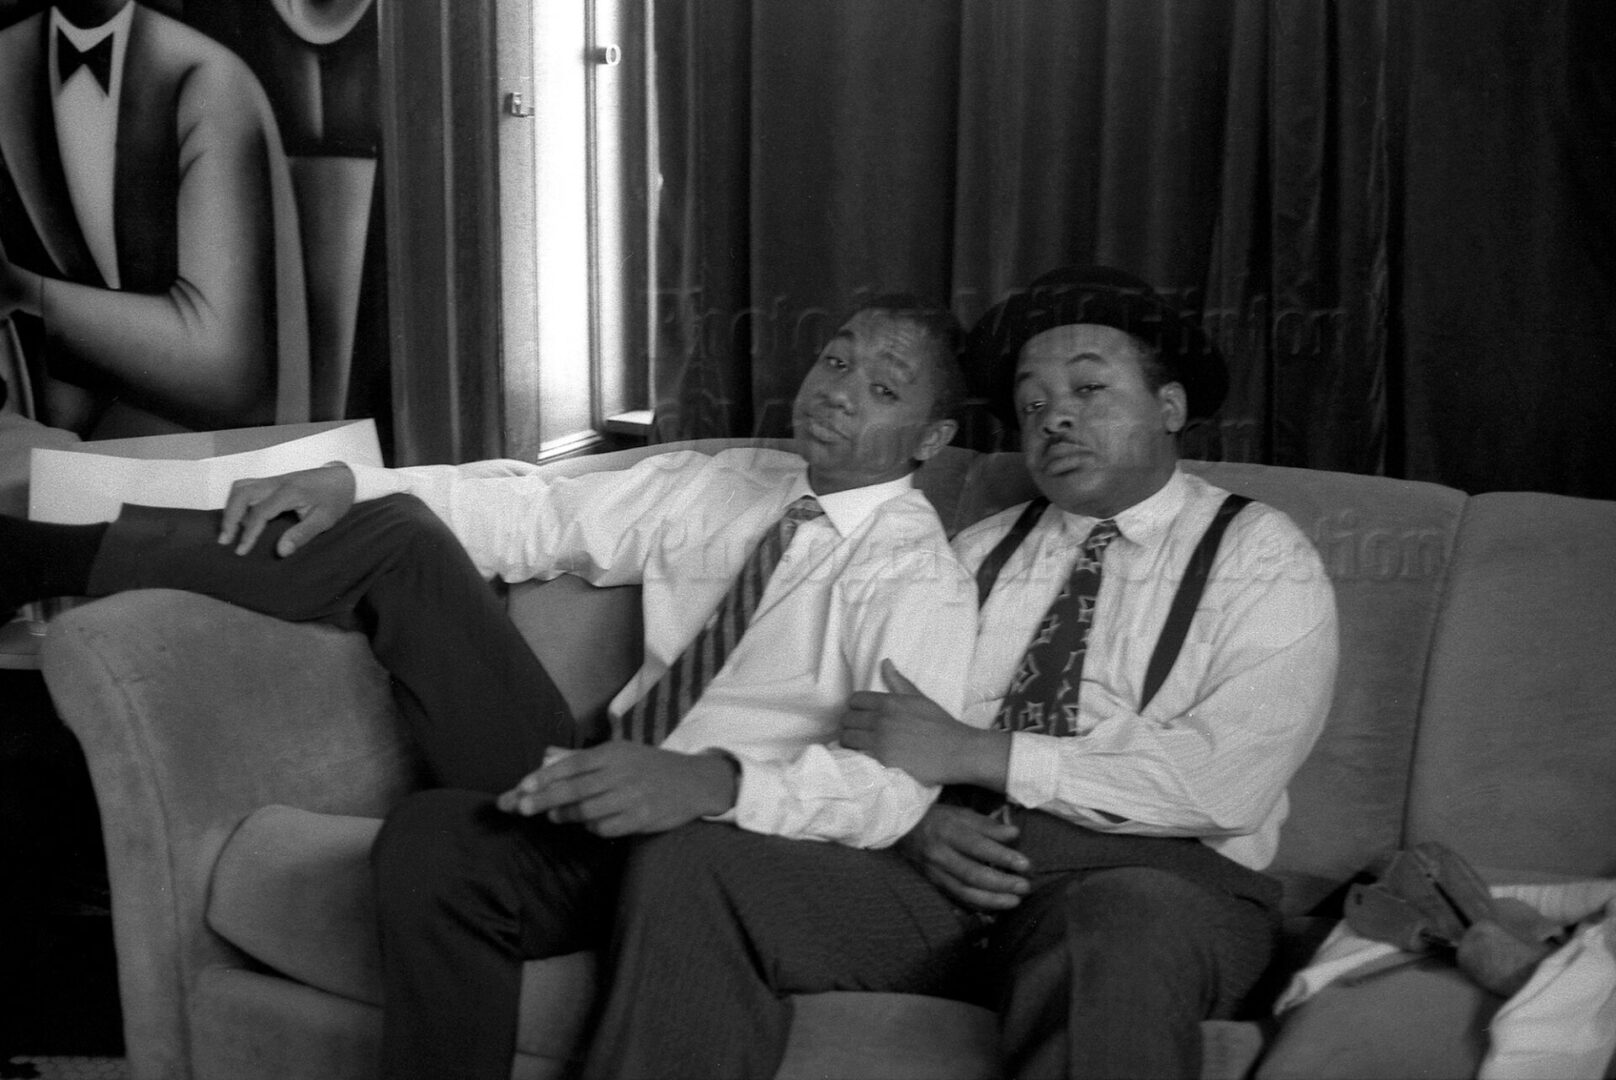 Photo by Milt Hinton<br>
© Milton J. Hinton<br> Photographic Collection <br><b class="captionn">Branford Marsalis and Jeff “Tain” Watts, NYC 1988</b>